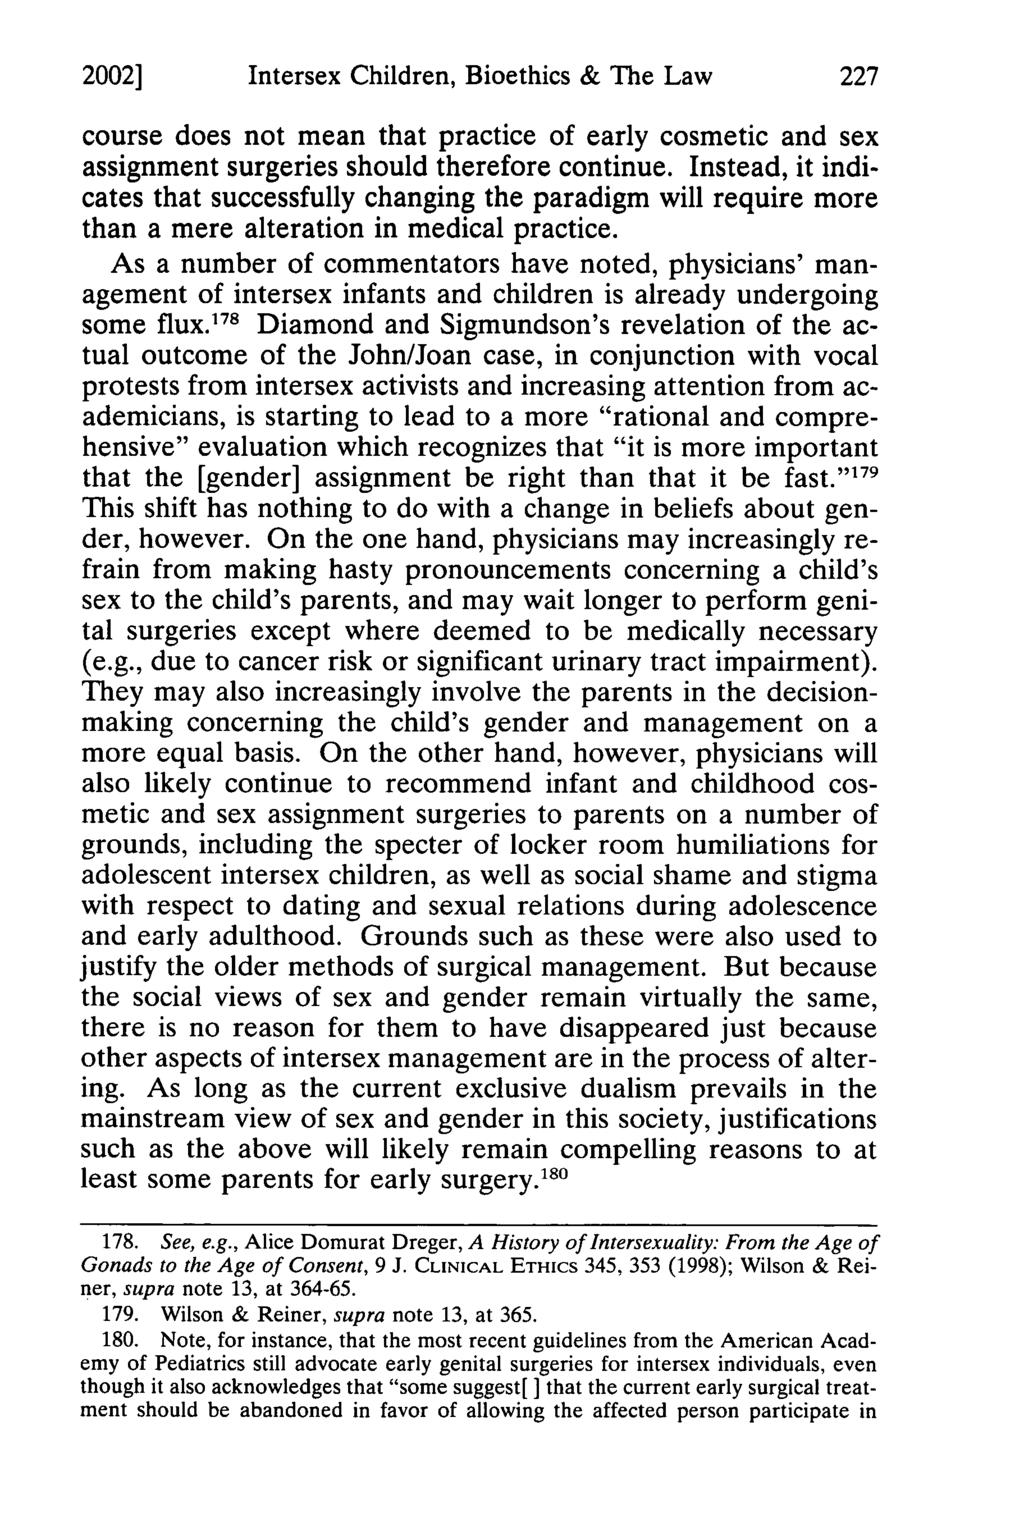 2002] Hermer: Paradigms Revised: Intersex Children, Bioethics & the Law Intersex Children, Bioethics & The Law course does not mean that practice of early cosmetic and sex assignment surgeries should